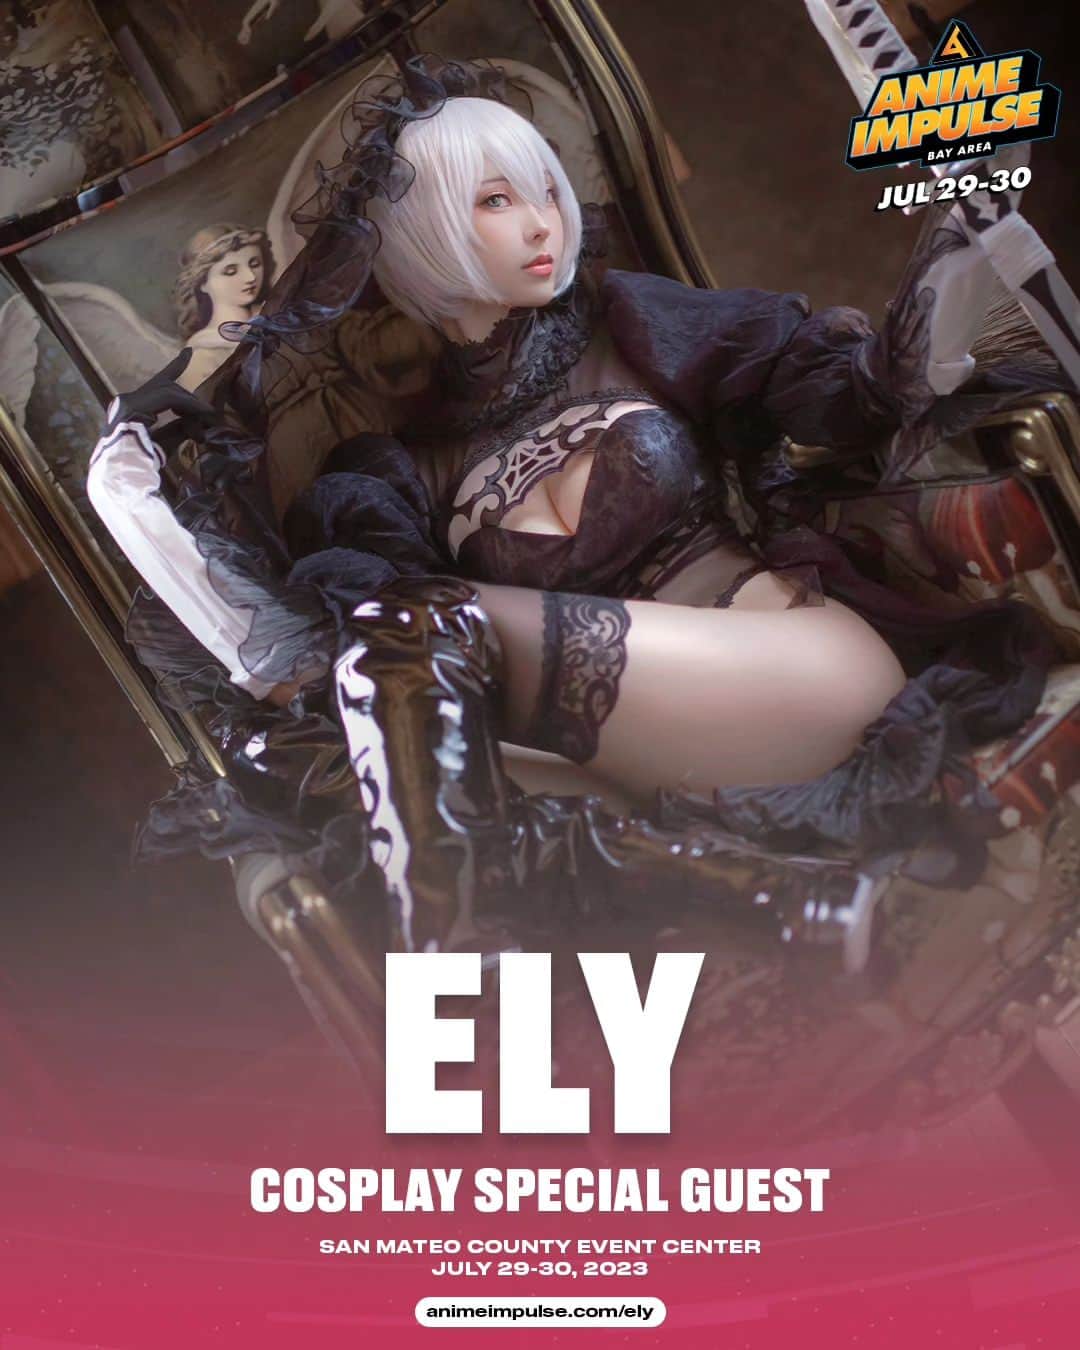 Elyのインスタグラム：「✨ GUEST ANNOUNCEMENT✨  It's been a long time coming, but she's BACK! We are thrilled to have our dear friend and cosplay royalty @eeelyeee guest with us once again at #ANIMEImpulseBayArea2023! 🥳💕  In celebration of her return, we are collaborating with her to release dakimakuras and skatedecks EXCLUSIVELY for ANIME Impulse Bay Area 2023, featuring her immaculate 2B cosplays! 🤍🖤 This will be a limited run, so place your pre-orders on our site NOW!  🛒: www.animeimpulse.com/ely」